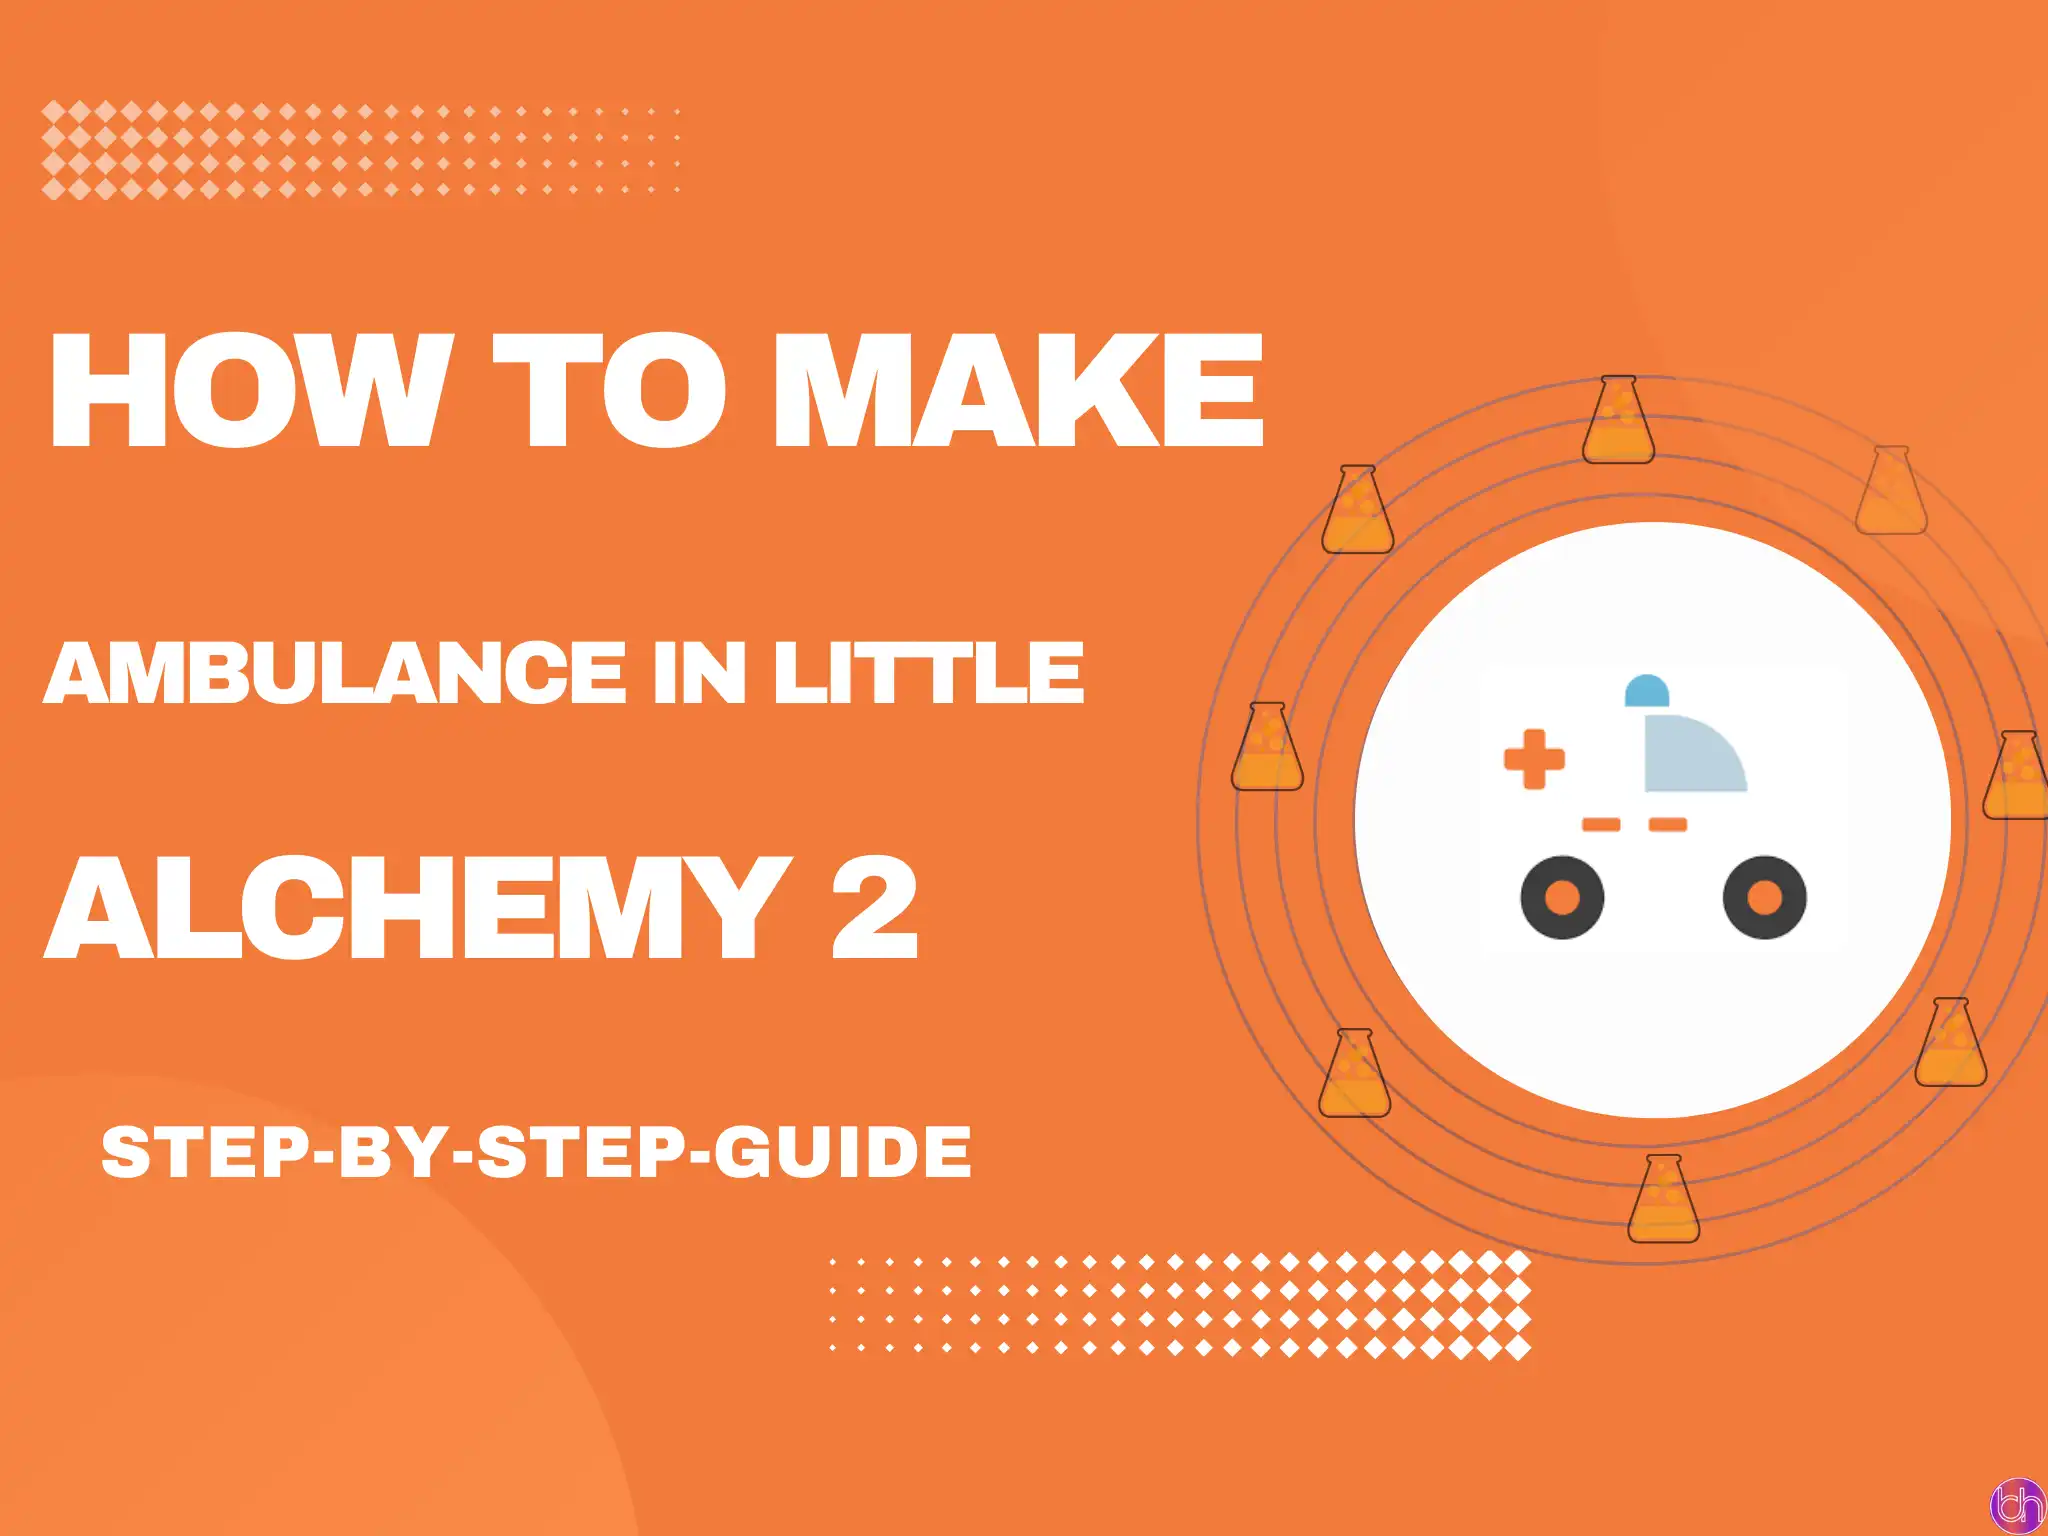 How to make Ambulance in Little Alchemy 2